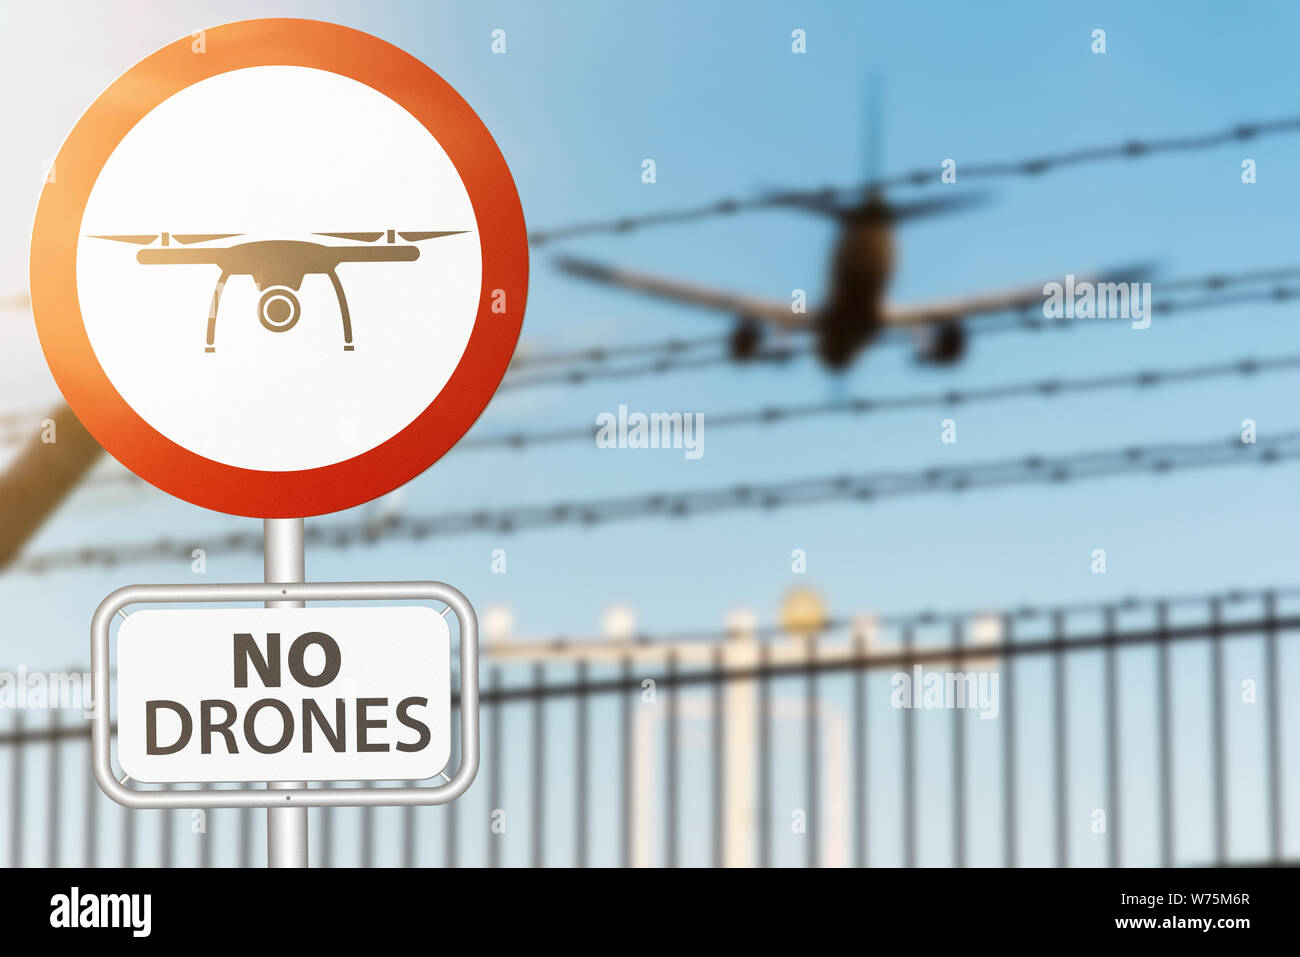 close-up of drone prohobition sign against security fence and airplane landing on airport Stock Photo